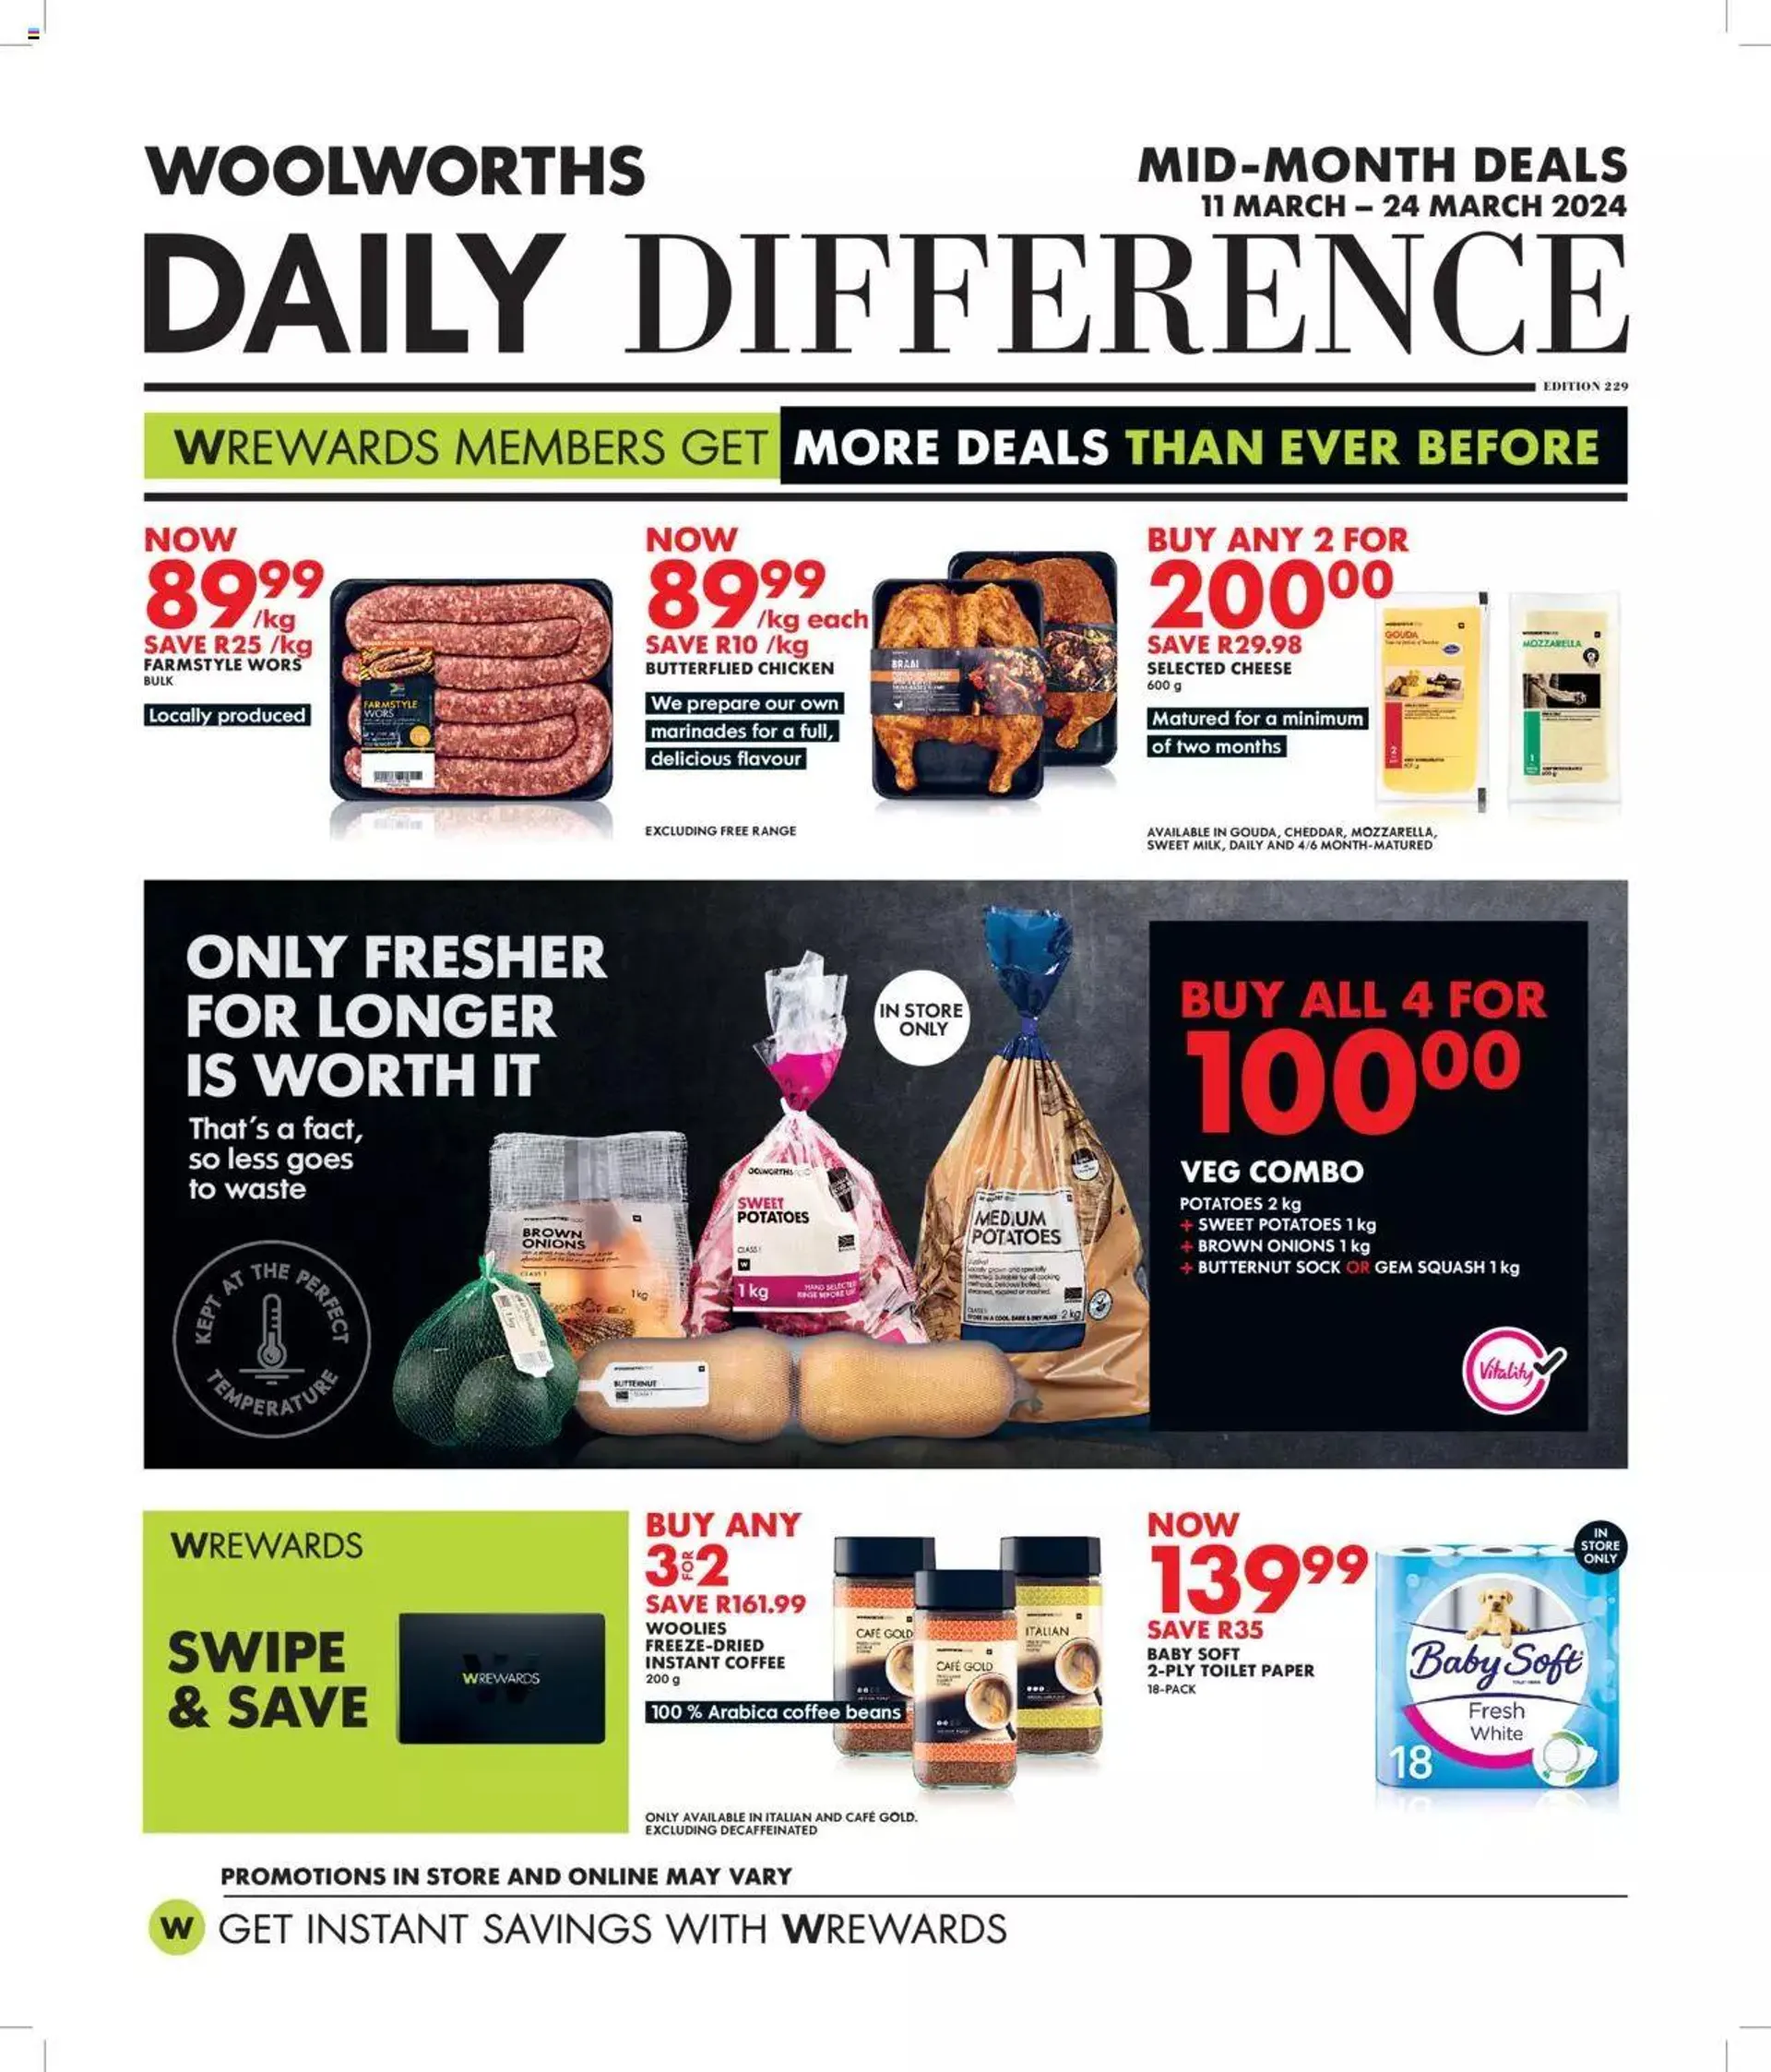 Woolworths Daily Difference - KwaZulu-Natal - 11 March 24 March 2024 - Page 1